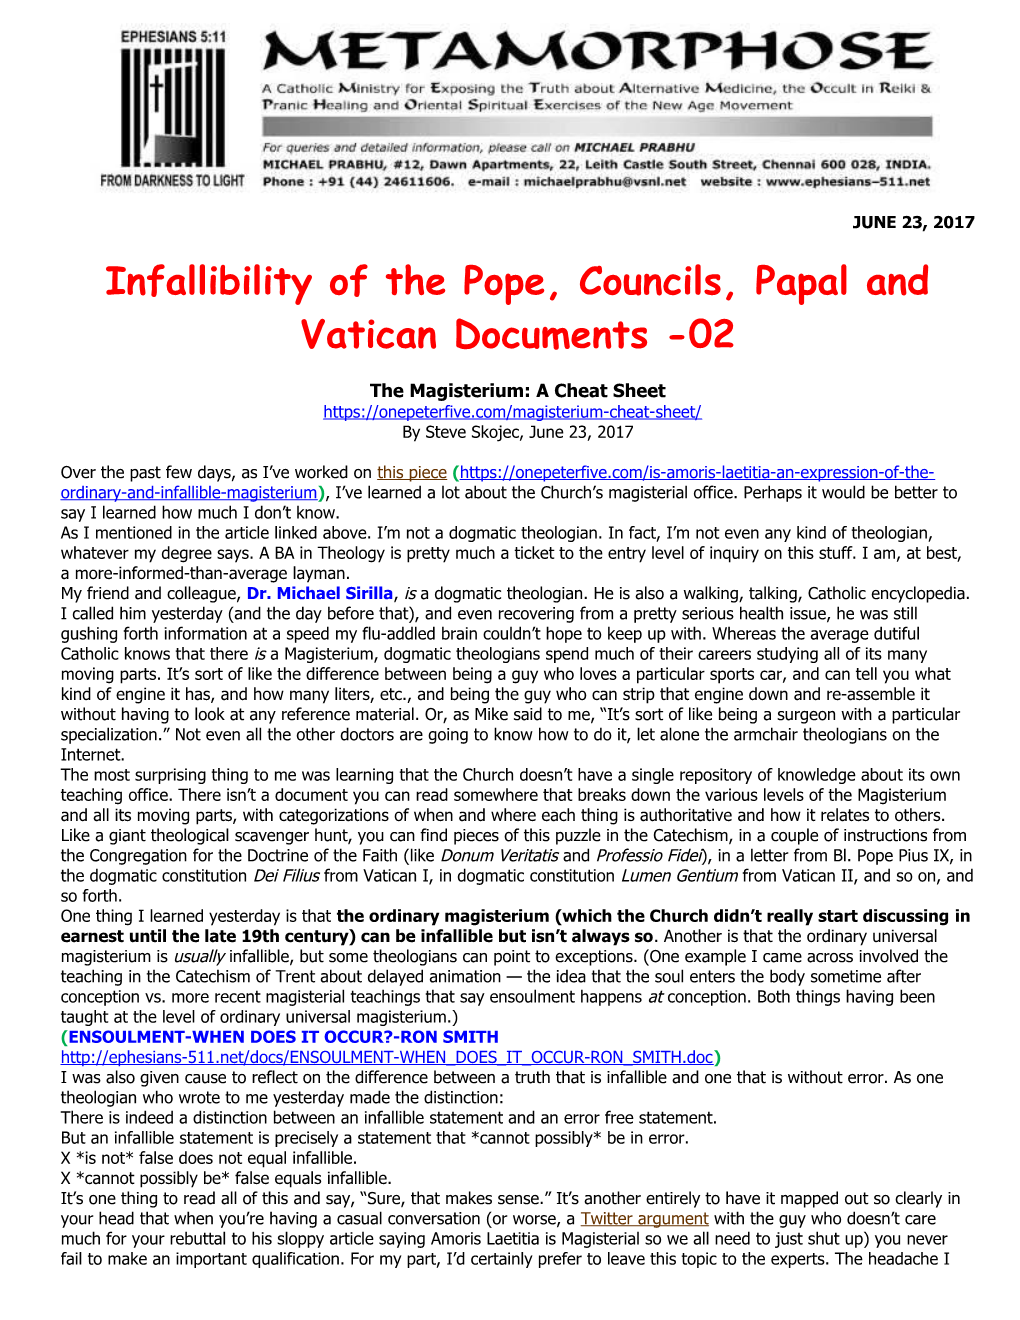 Infallibility of the Pope, Councils, Papal and Vatican Documents -02